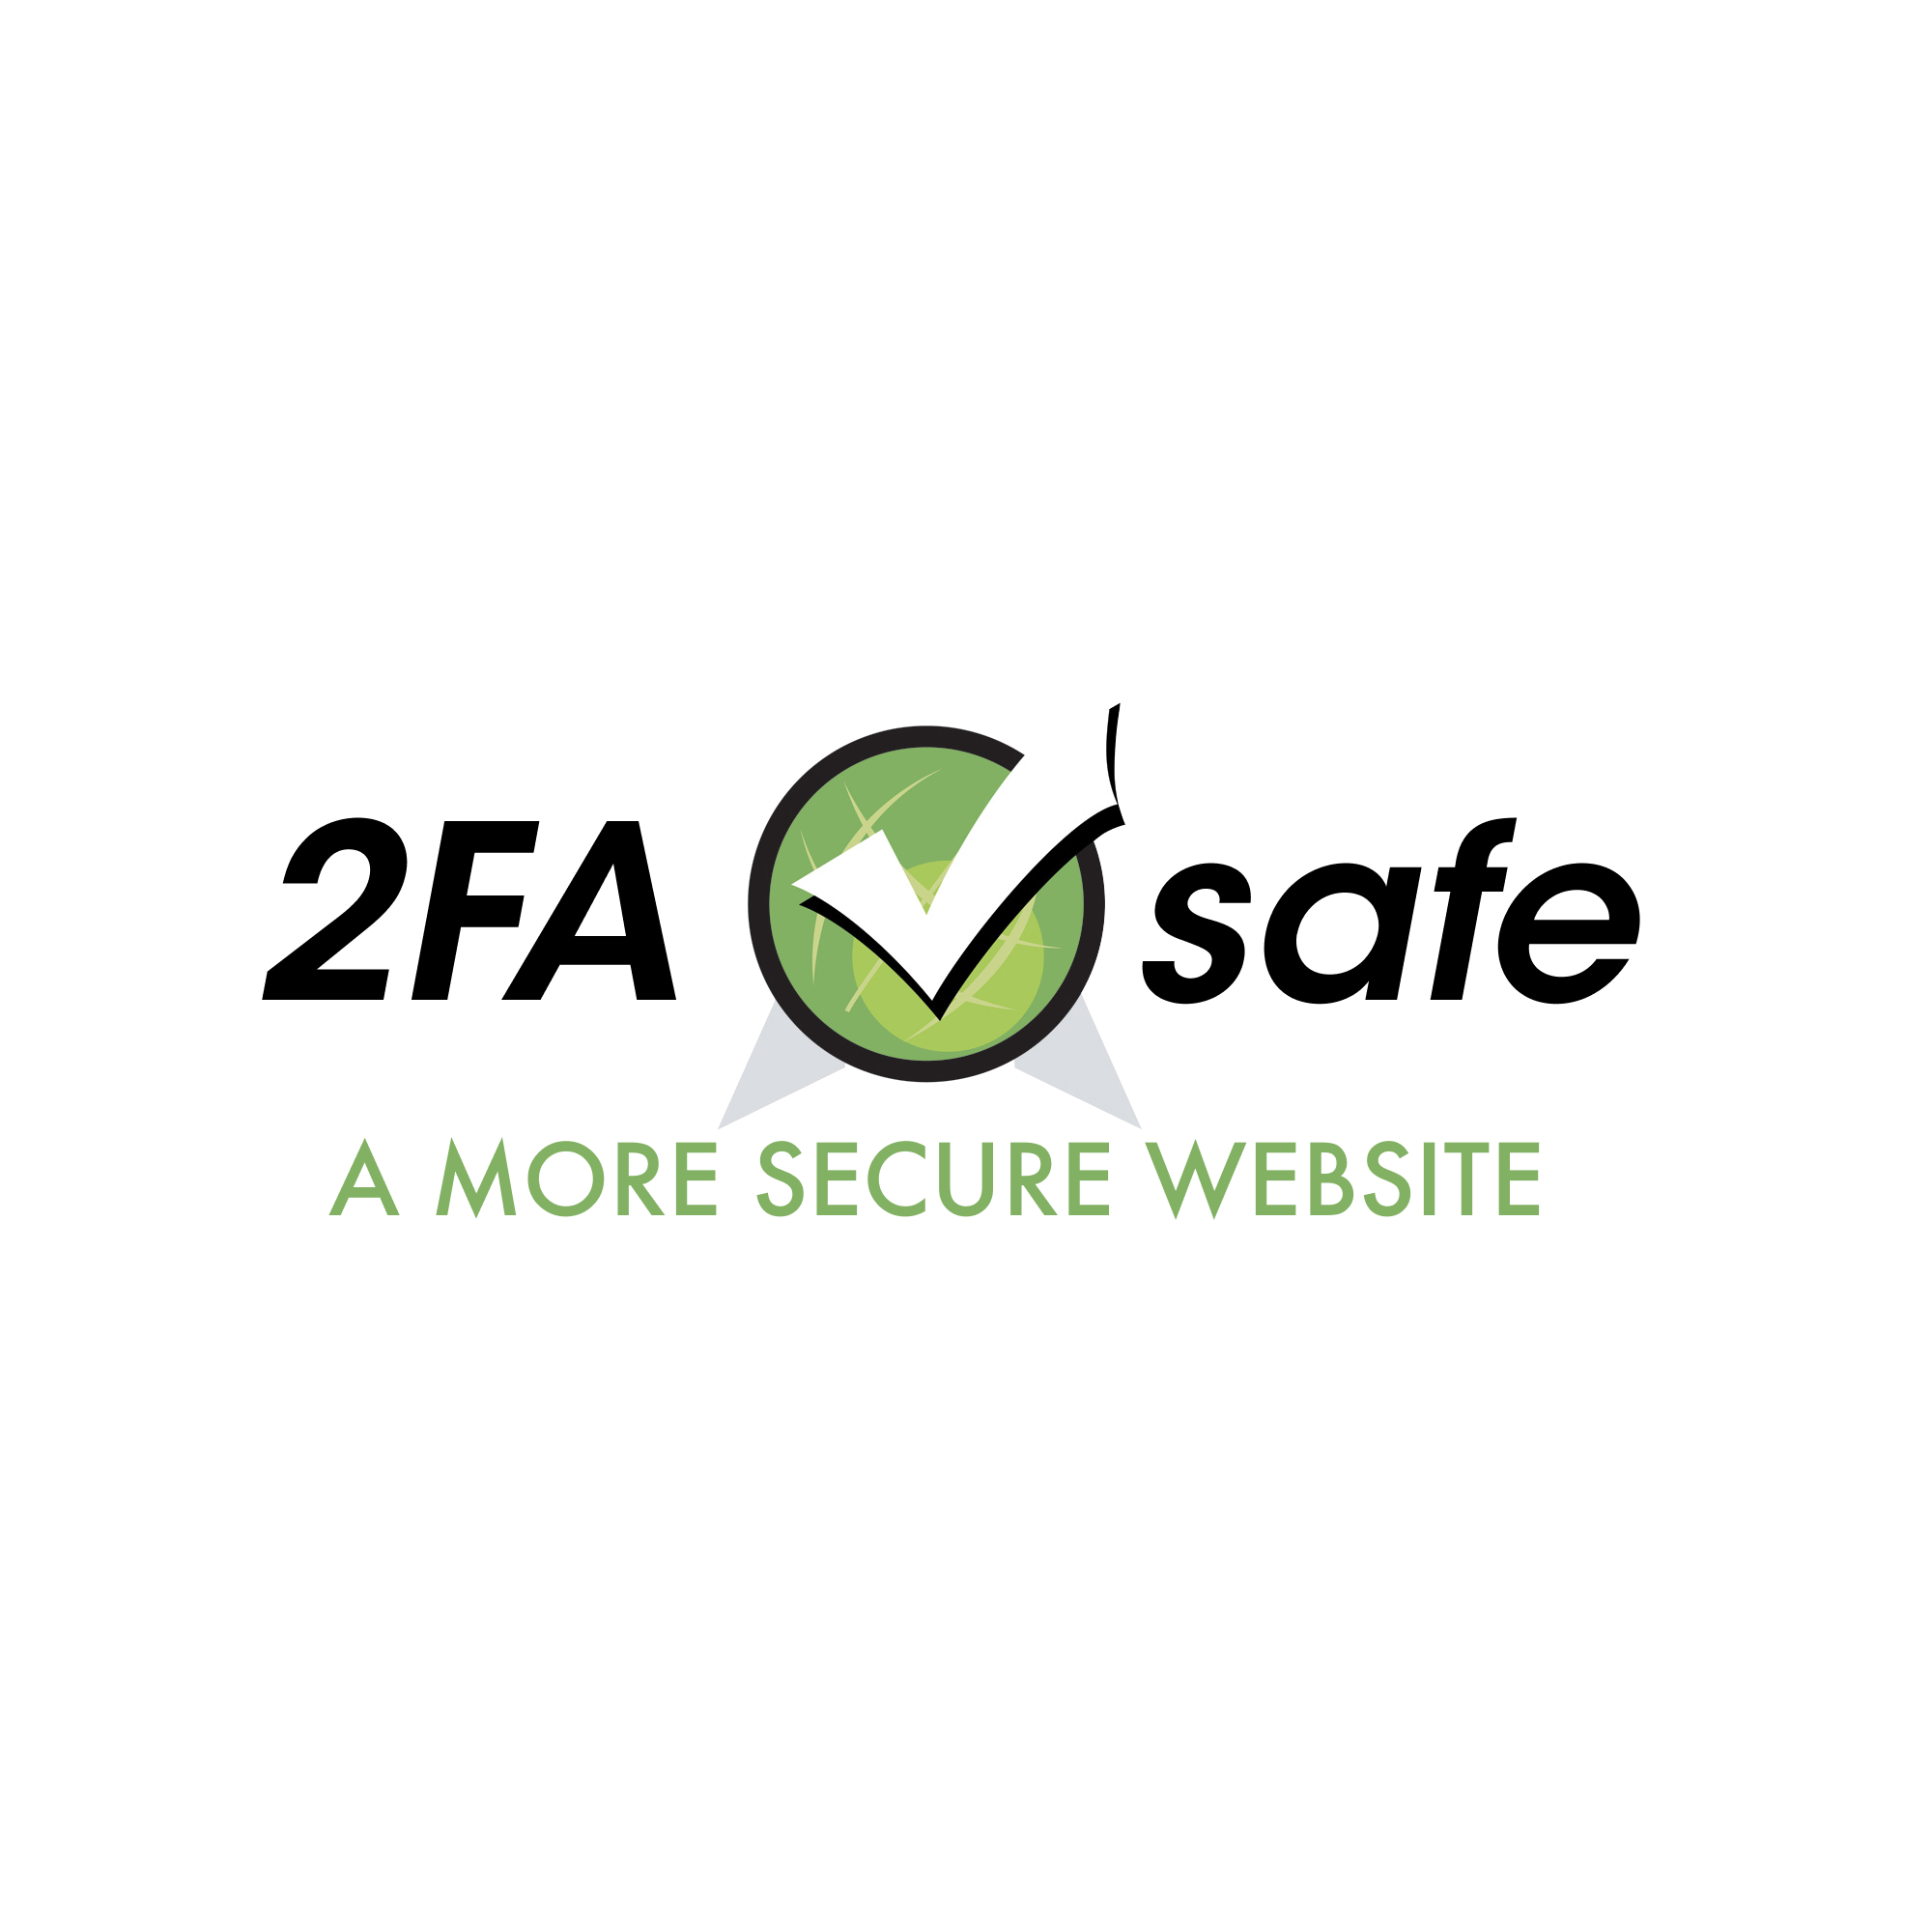 2FA icon for more secure websites